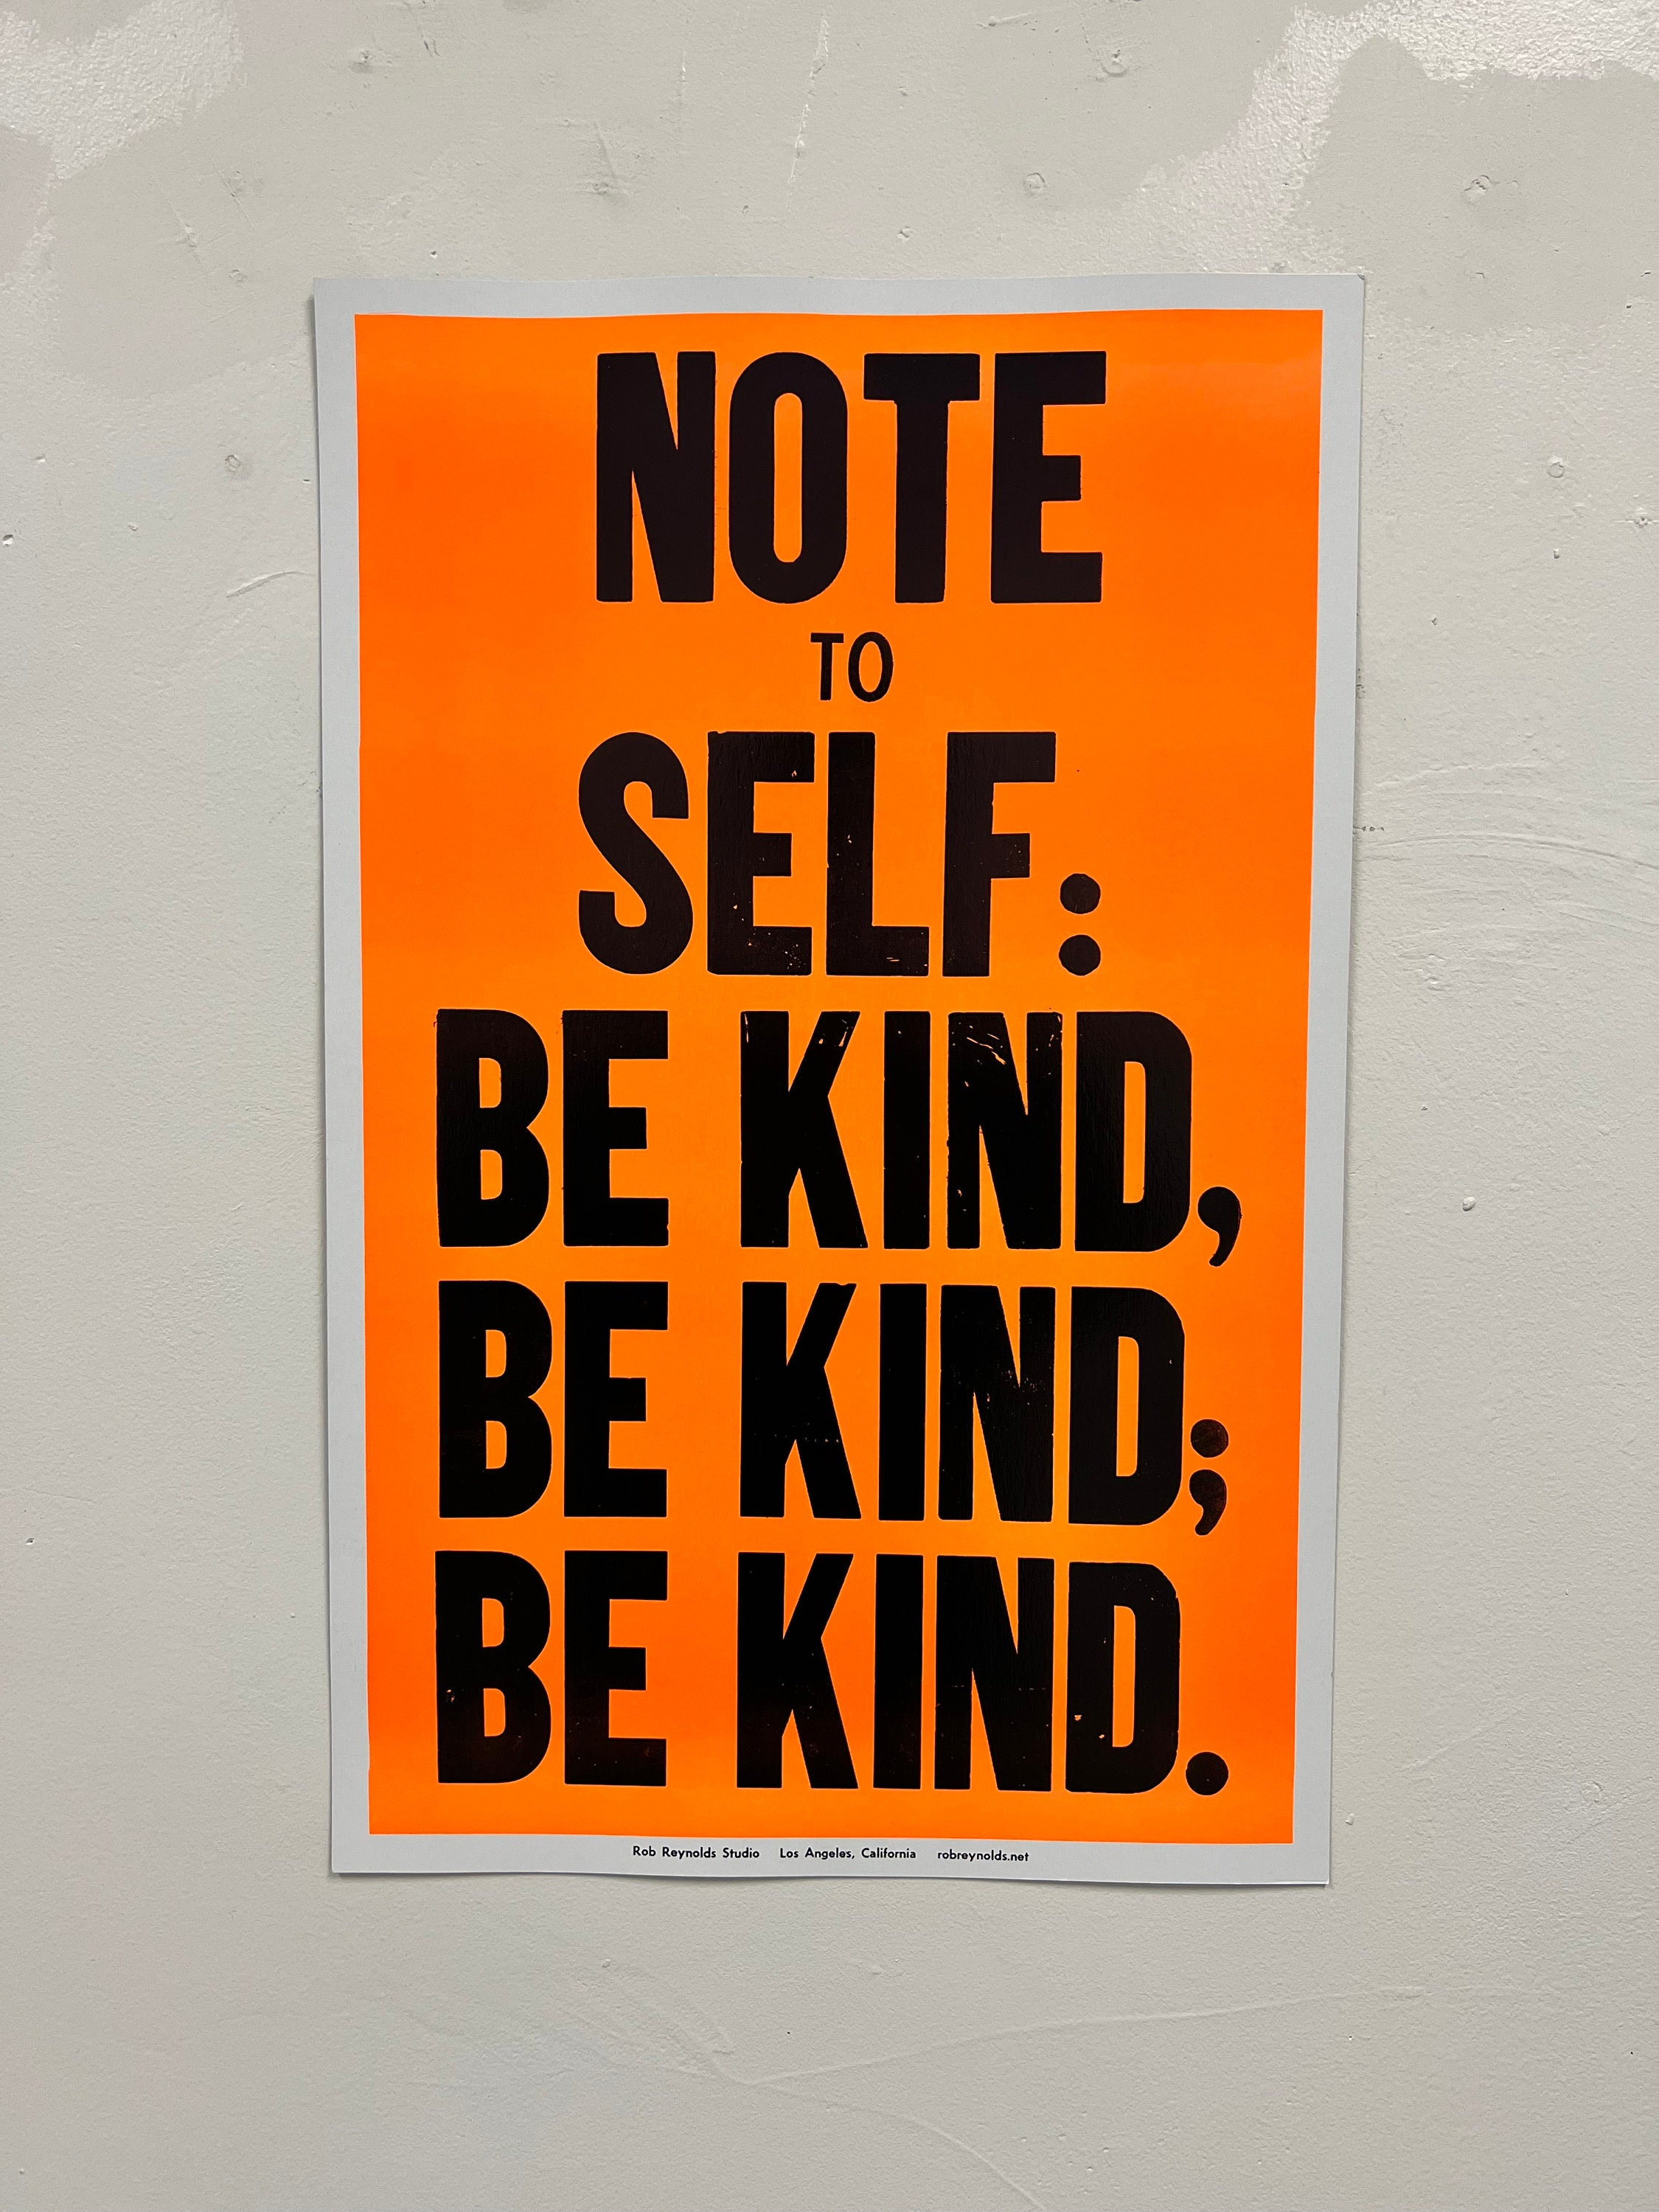 Geurloos Warmte motto Note to Self: Be Kind Be Kind Be Kind. Print by Rob Reynolds - Etsy